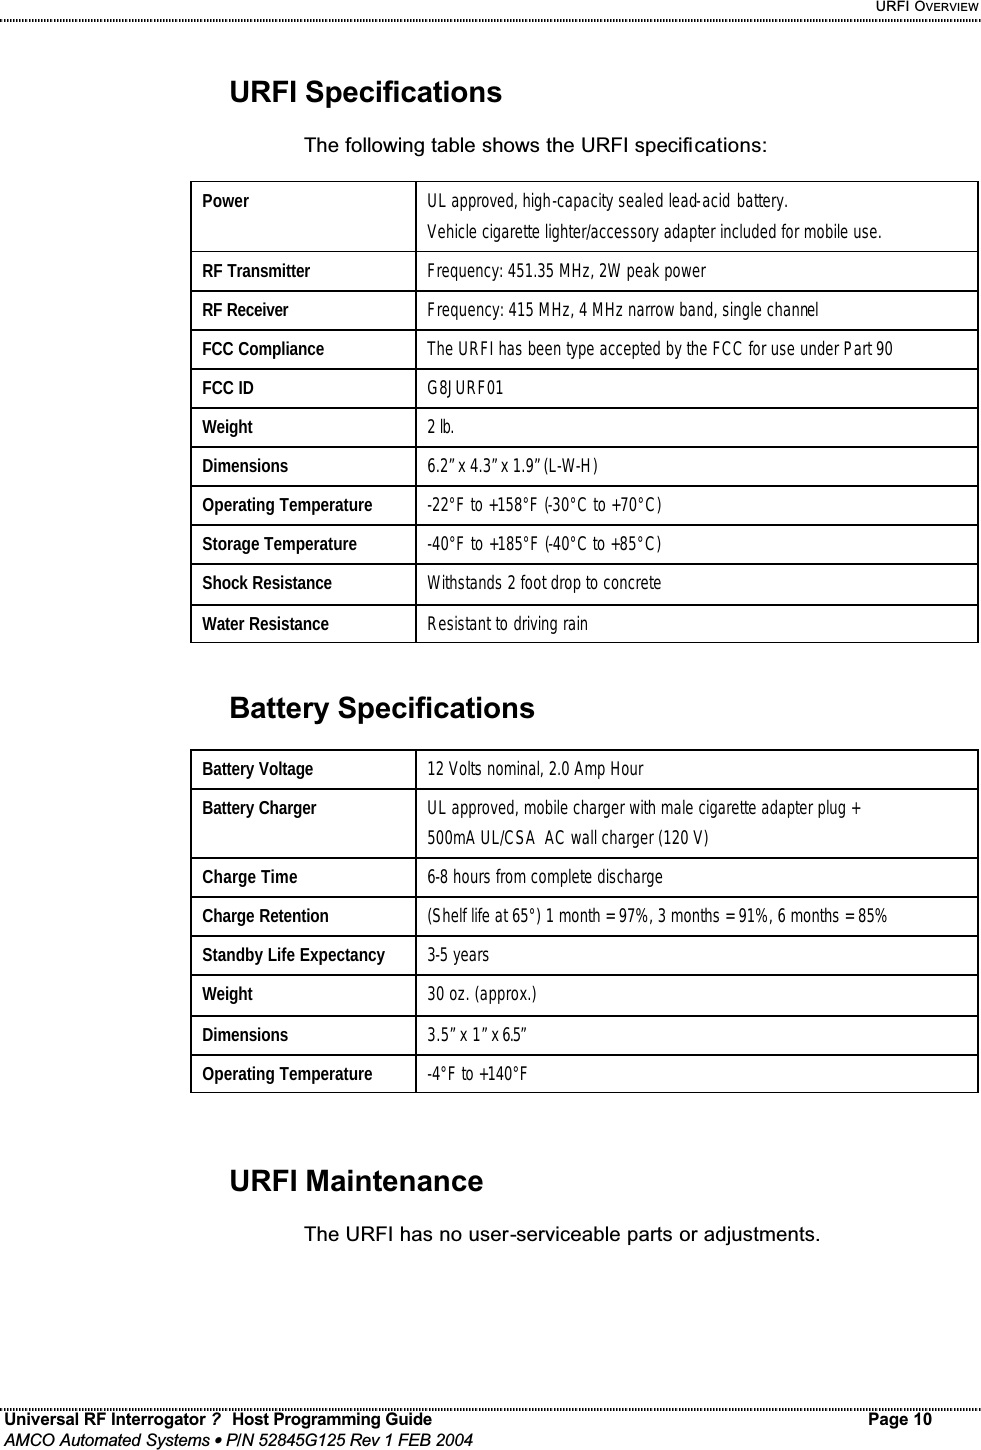     URFI OVERVIEW Universal RF Interrogator ?  Host Programming Guide Page 10  AMCO Automated Systems • P/N 52845G125 Rev 1 FEB 2004   URFI Specifications  The following table shows the URFI specifications:  Power   UL approved, high-capacity sealed lead-acid battery. Vehicle cigarette lighter/accessory adapter included for mobile use. RF Transmitter  Frequency: 451.35 MHz, 2W peak power RF Receiver  Frequency: 415 MHz, 4 MHz narrow band, single channel FCC Compliance  The URFI has been type accepted by the FCC for use under Part 90 FCC ID  G8JURF01 Weight  2 lb. Dimensions  6.2” x 4.3” x 1.9” (L-W-H) Operating Temperature  -22°F to +158°F (-30°C to +70°C) Storage Temperature  -40°F to +185°F (-40°C to +85°C) Shock Resistance  Withstands 2 foot drop to concrete Water Resistance  Resistant to driving rain   Battery Specifications  Battery Voltage  12 Volts nominal, 2.0 Amp Hour Battery Charger  UL approved, mobile charger with male cigarette adapter plug + 500mA UL/CSA  AC wall charger (120 V) Charge Time  6-8 hours from complete discharge Charge Retention  (Shelf life at 65°) 1 month = 97%, 3 months = 91%, 6 months = 85%  Standby Life Expectancy  3-5 years Weight  30 oz. (approx.) Dimensions  3.5” x 1” x 6.5”  Operating Temperature  -4°F to +140°F    URFI Maintenance  The URFI has no user-serviceable parts or adjustments. 